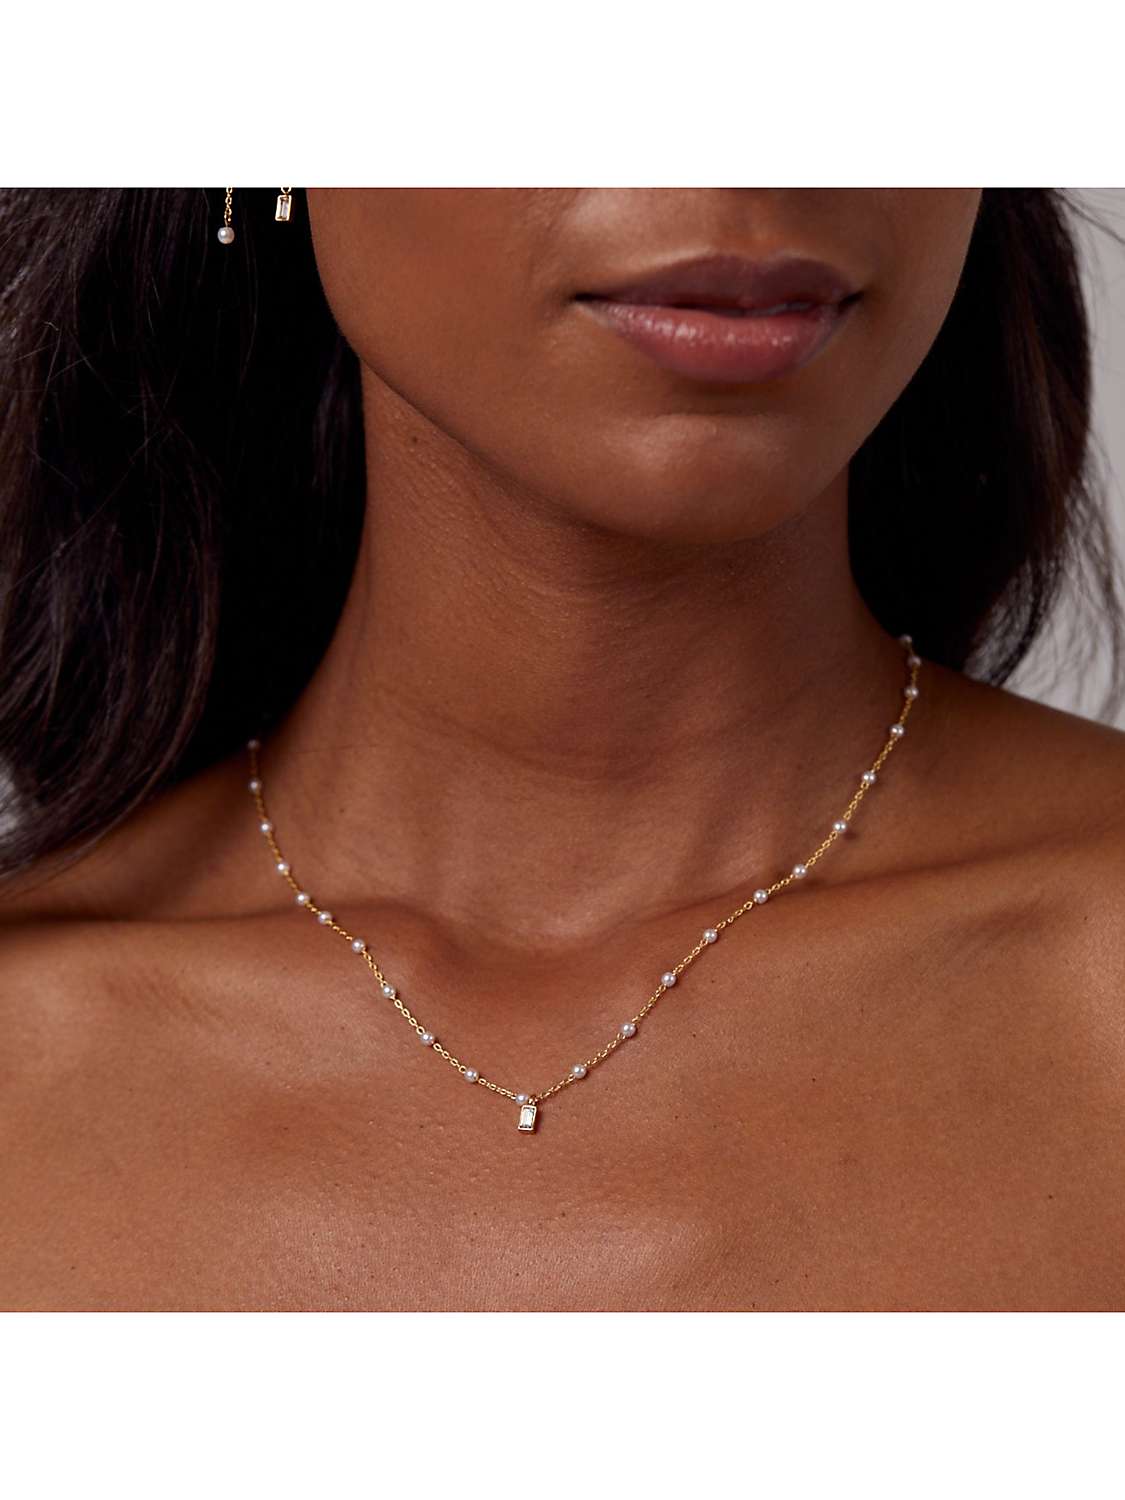 Buy Orelia Mini Swarovski Baguette Crystal and Pearl Chain Necklace, Gold/White Online at johnlewis.com